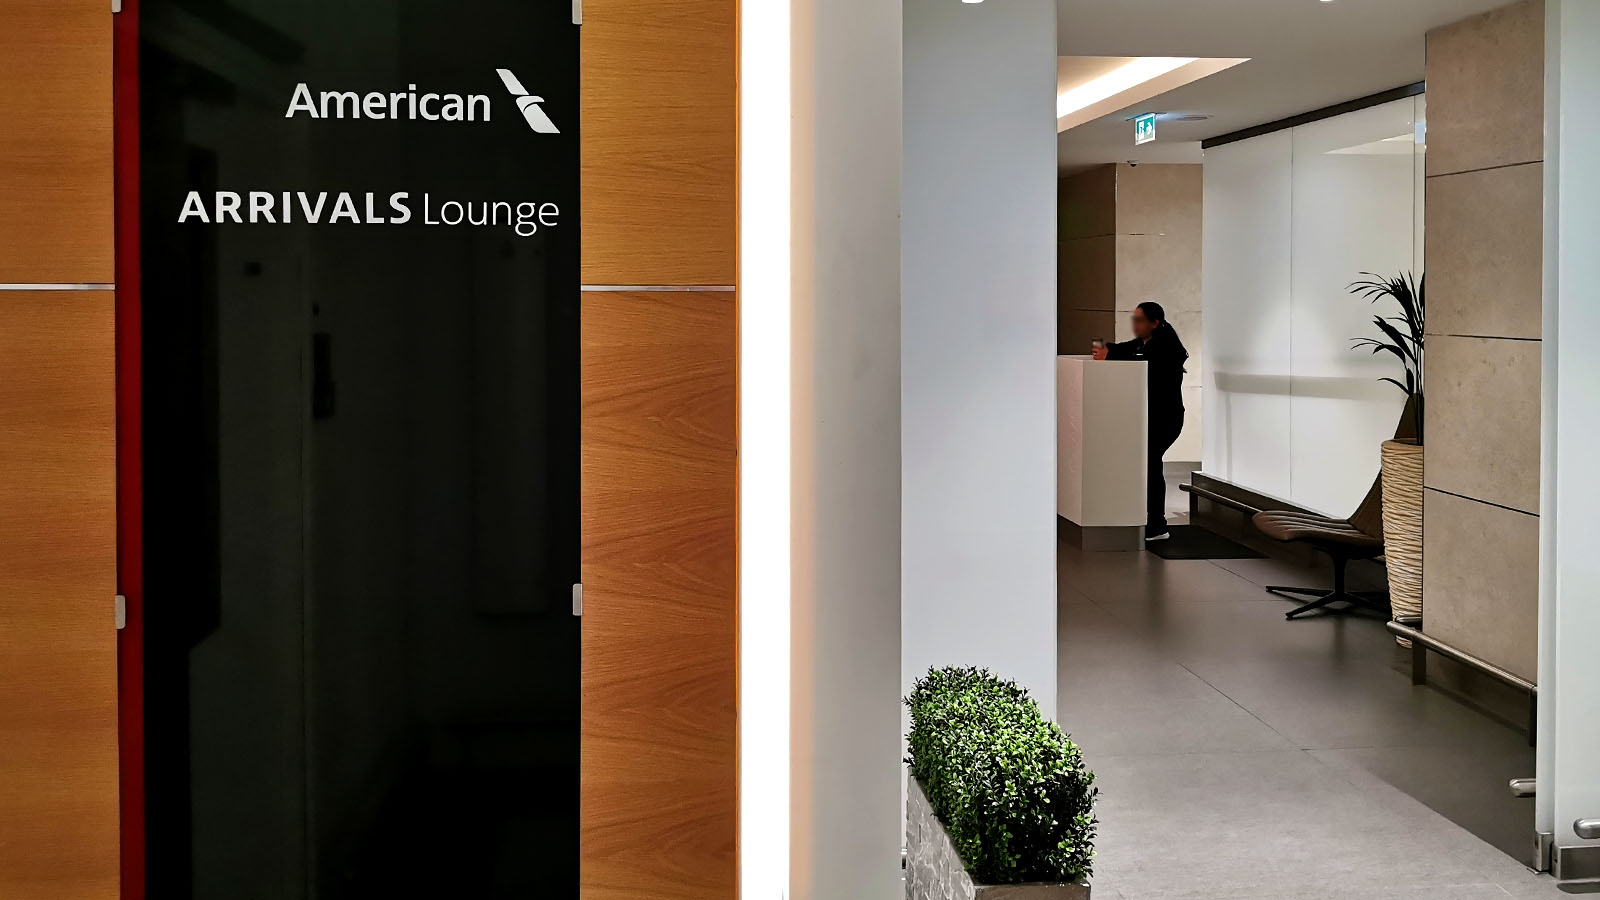 American Airlines Arrivals Lounge at London Heathrow